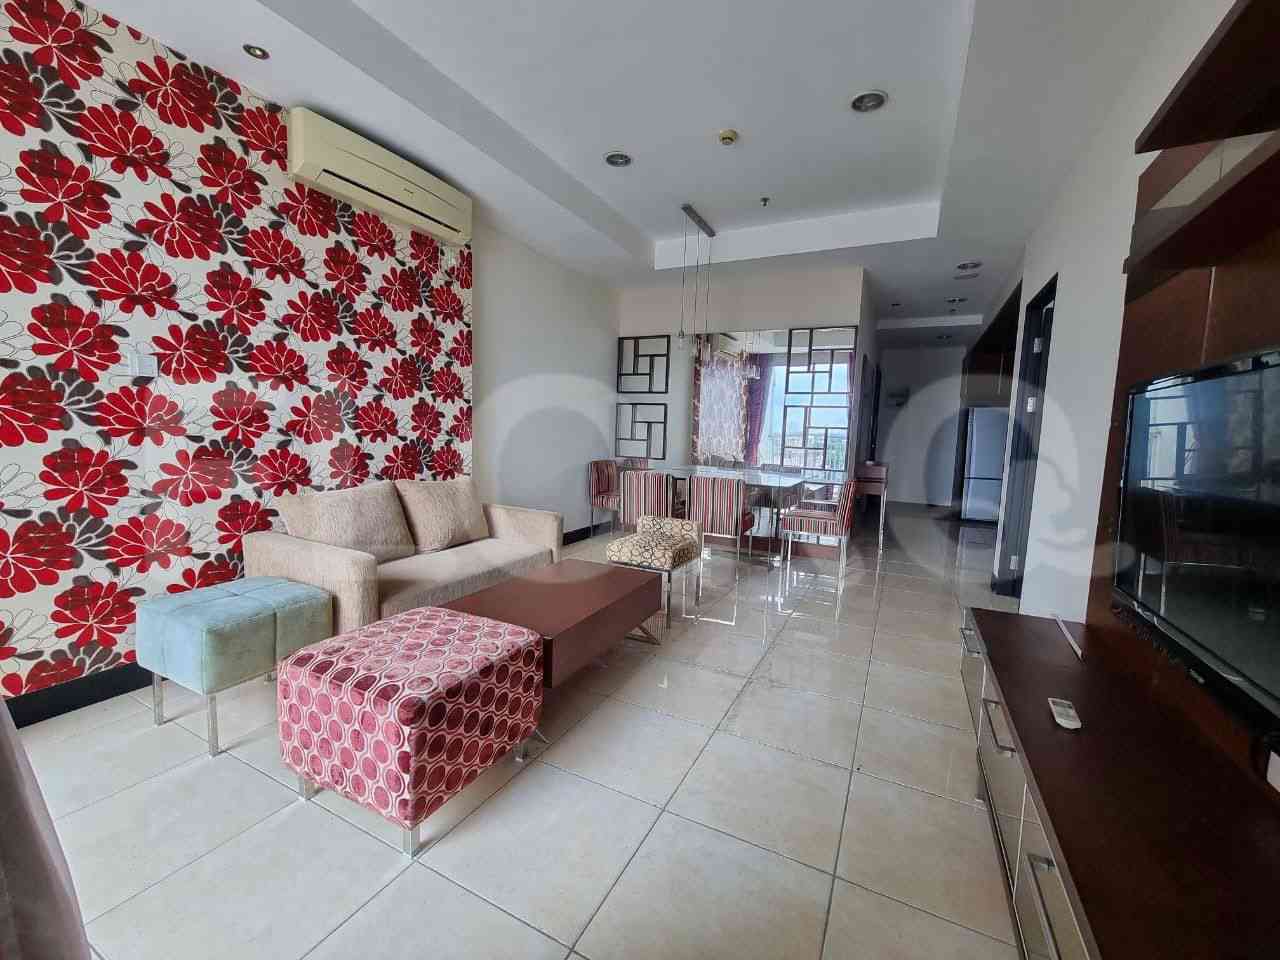 2 Bedroom on 8th Floor for Rent in Essence Darmawangsa Apartment - fci5f1 1